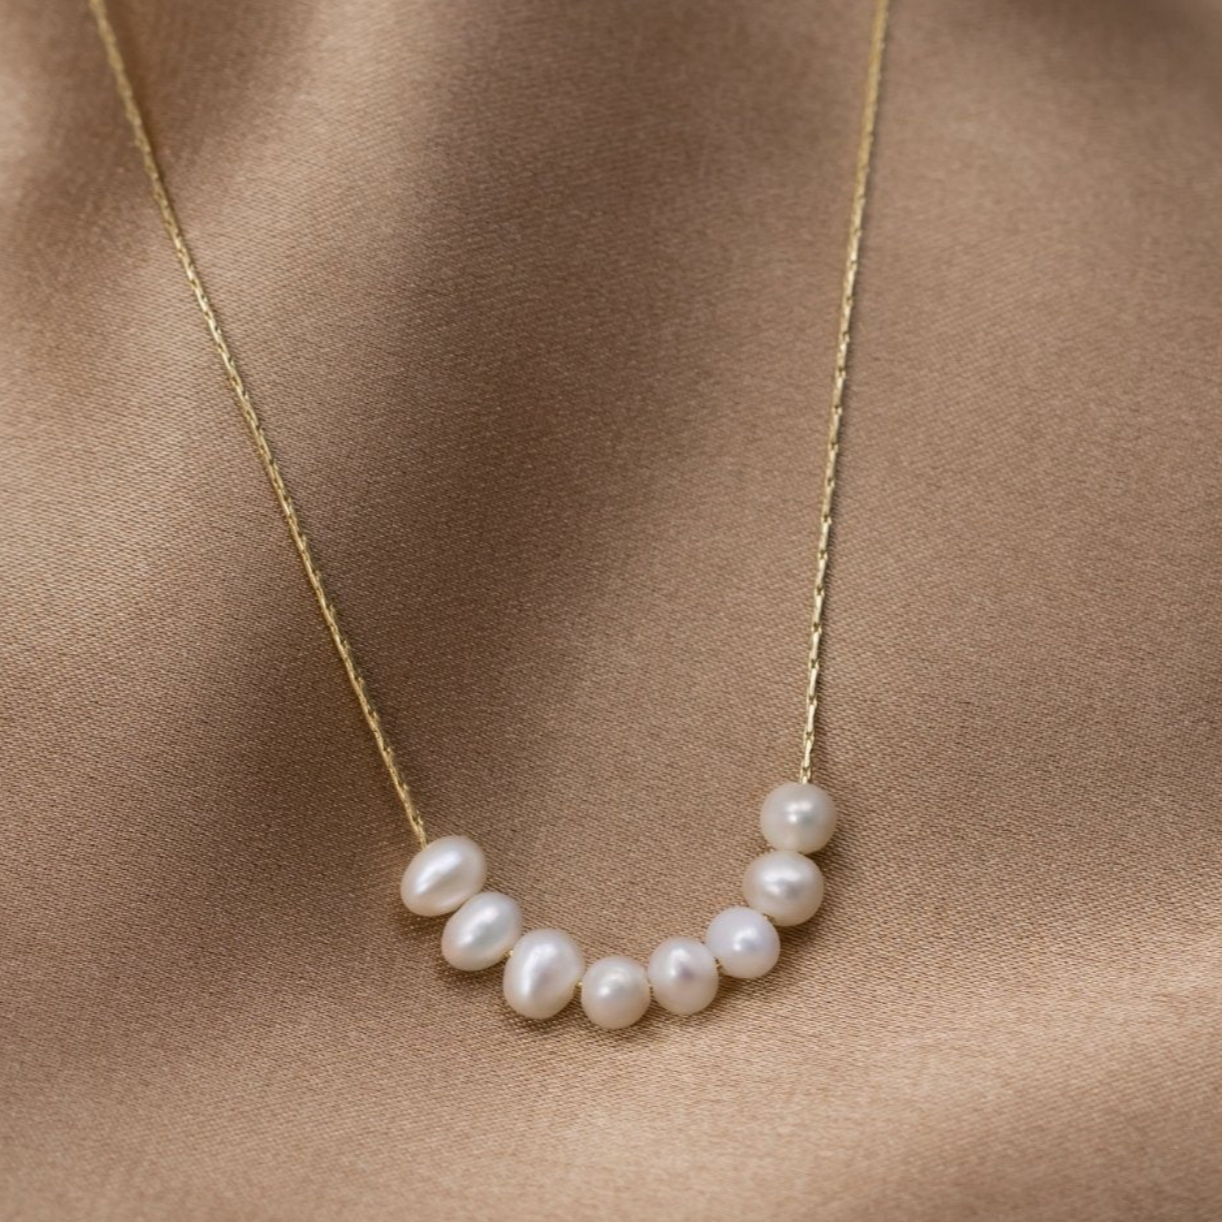 Freshwater Pearls in Gold Necklace